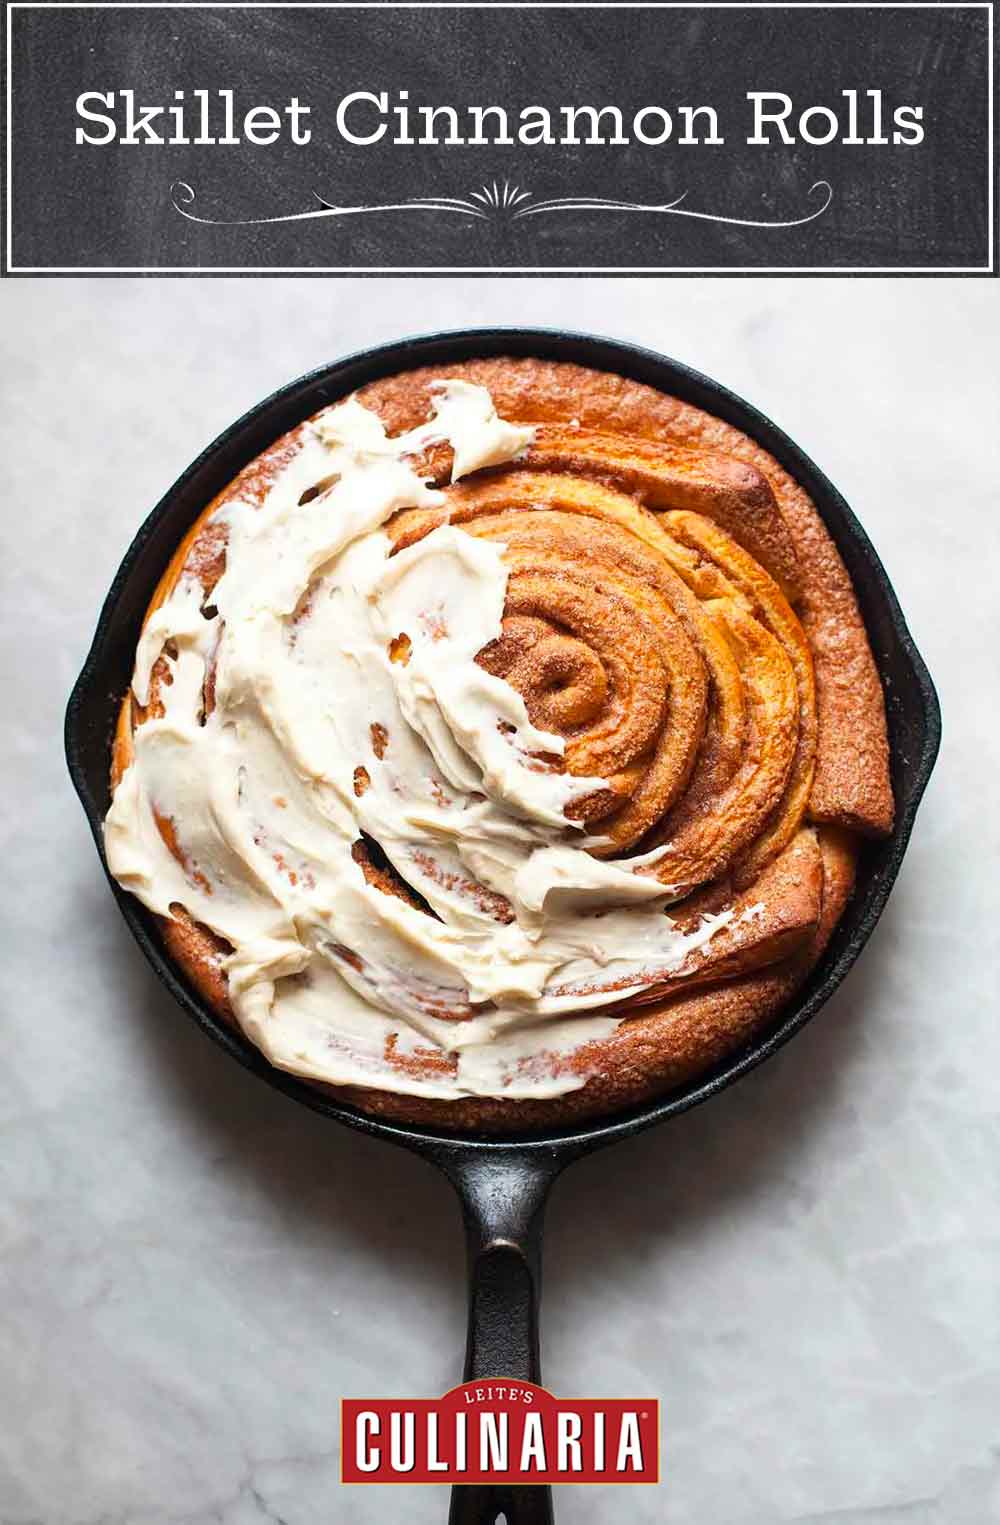 A giant skillet cinnamon roll in a black cast iron pan half cover with cream cheese icing.